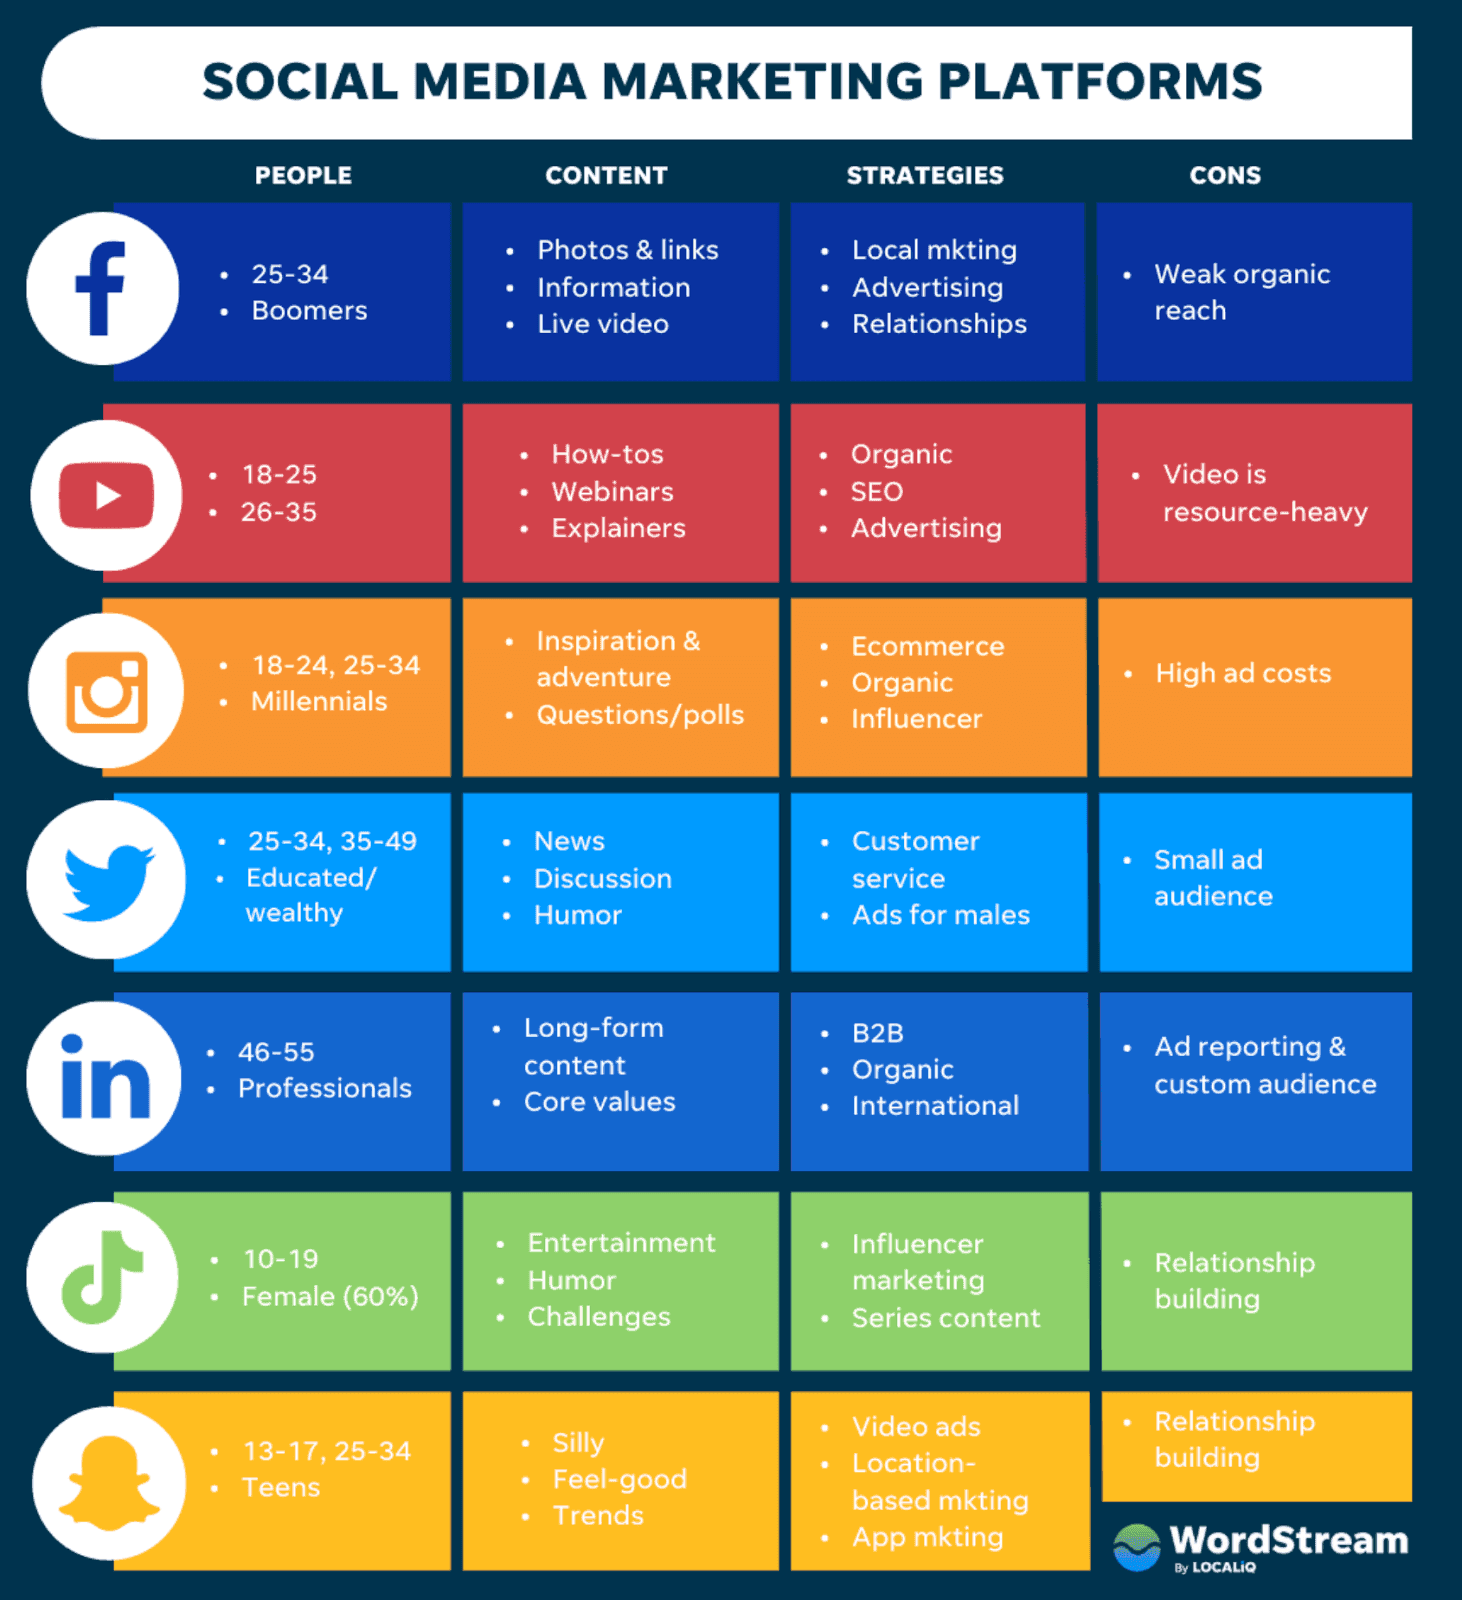 Chart breaking down each social media marketing platforms by audience, content, strategies, and cons